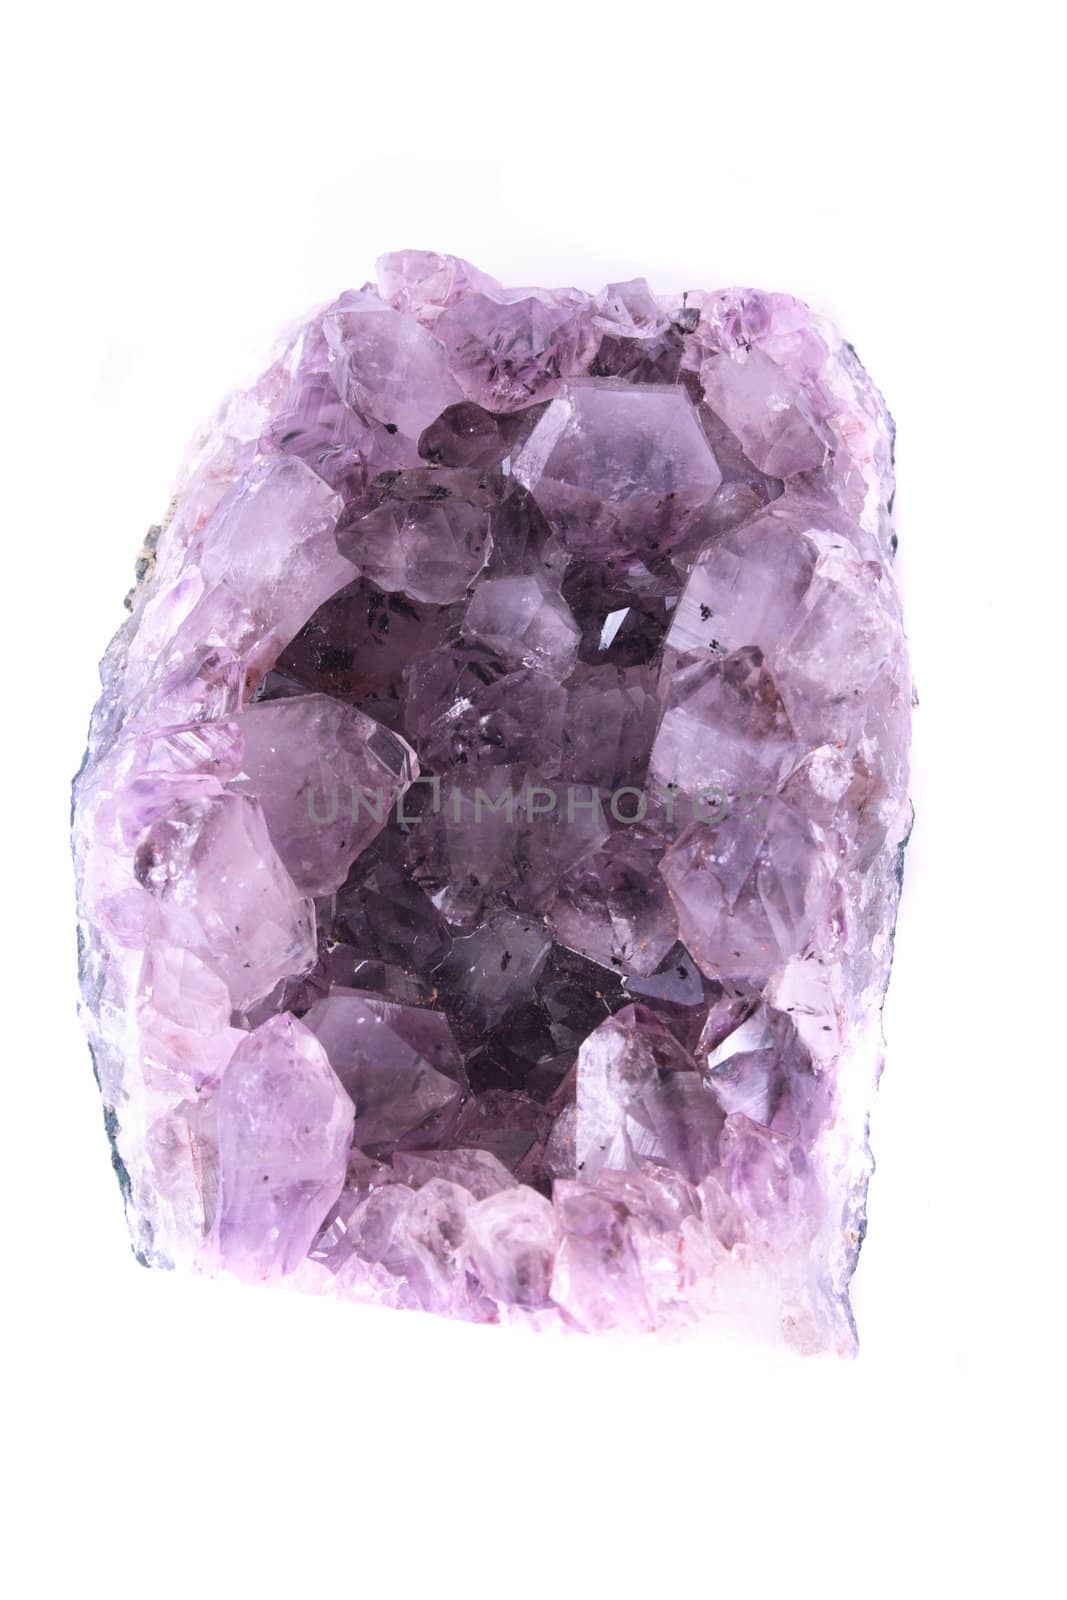 violet amethyst isolated on the white background 